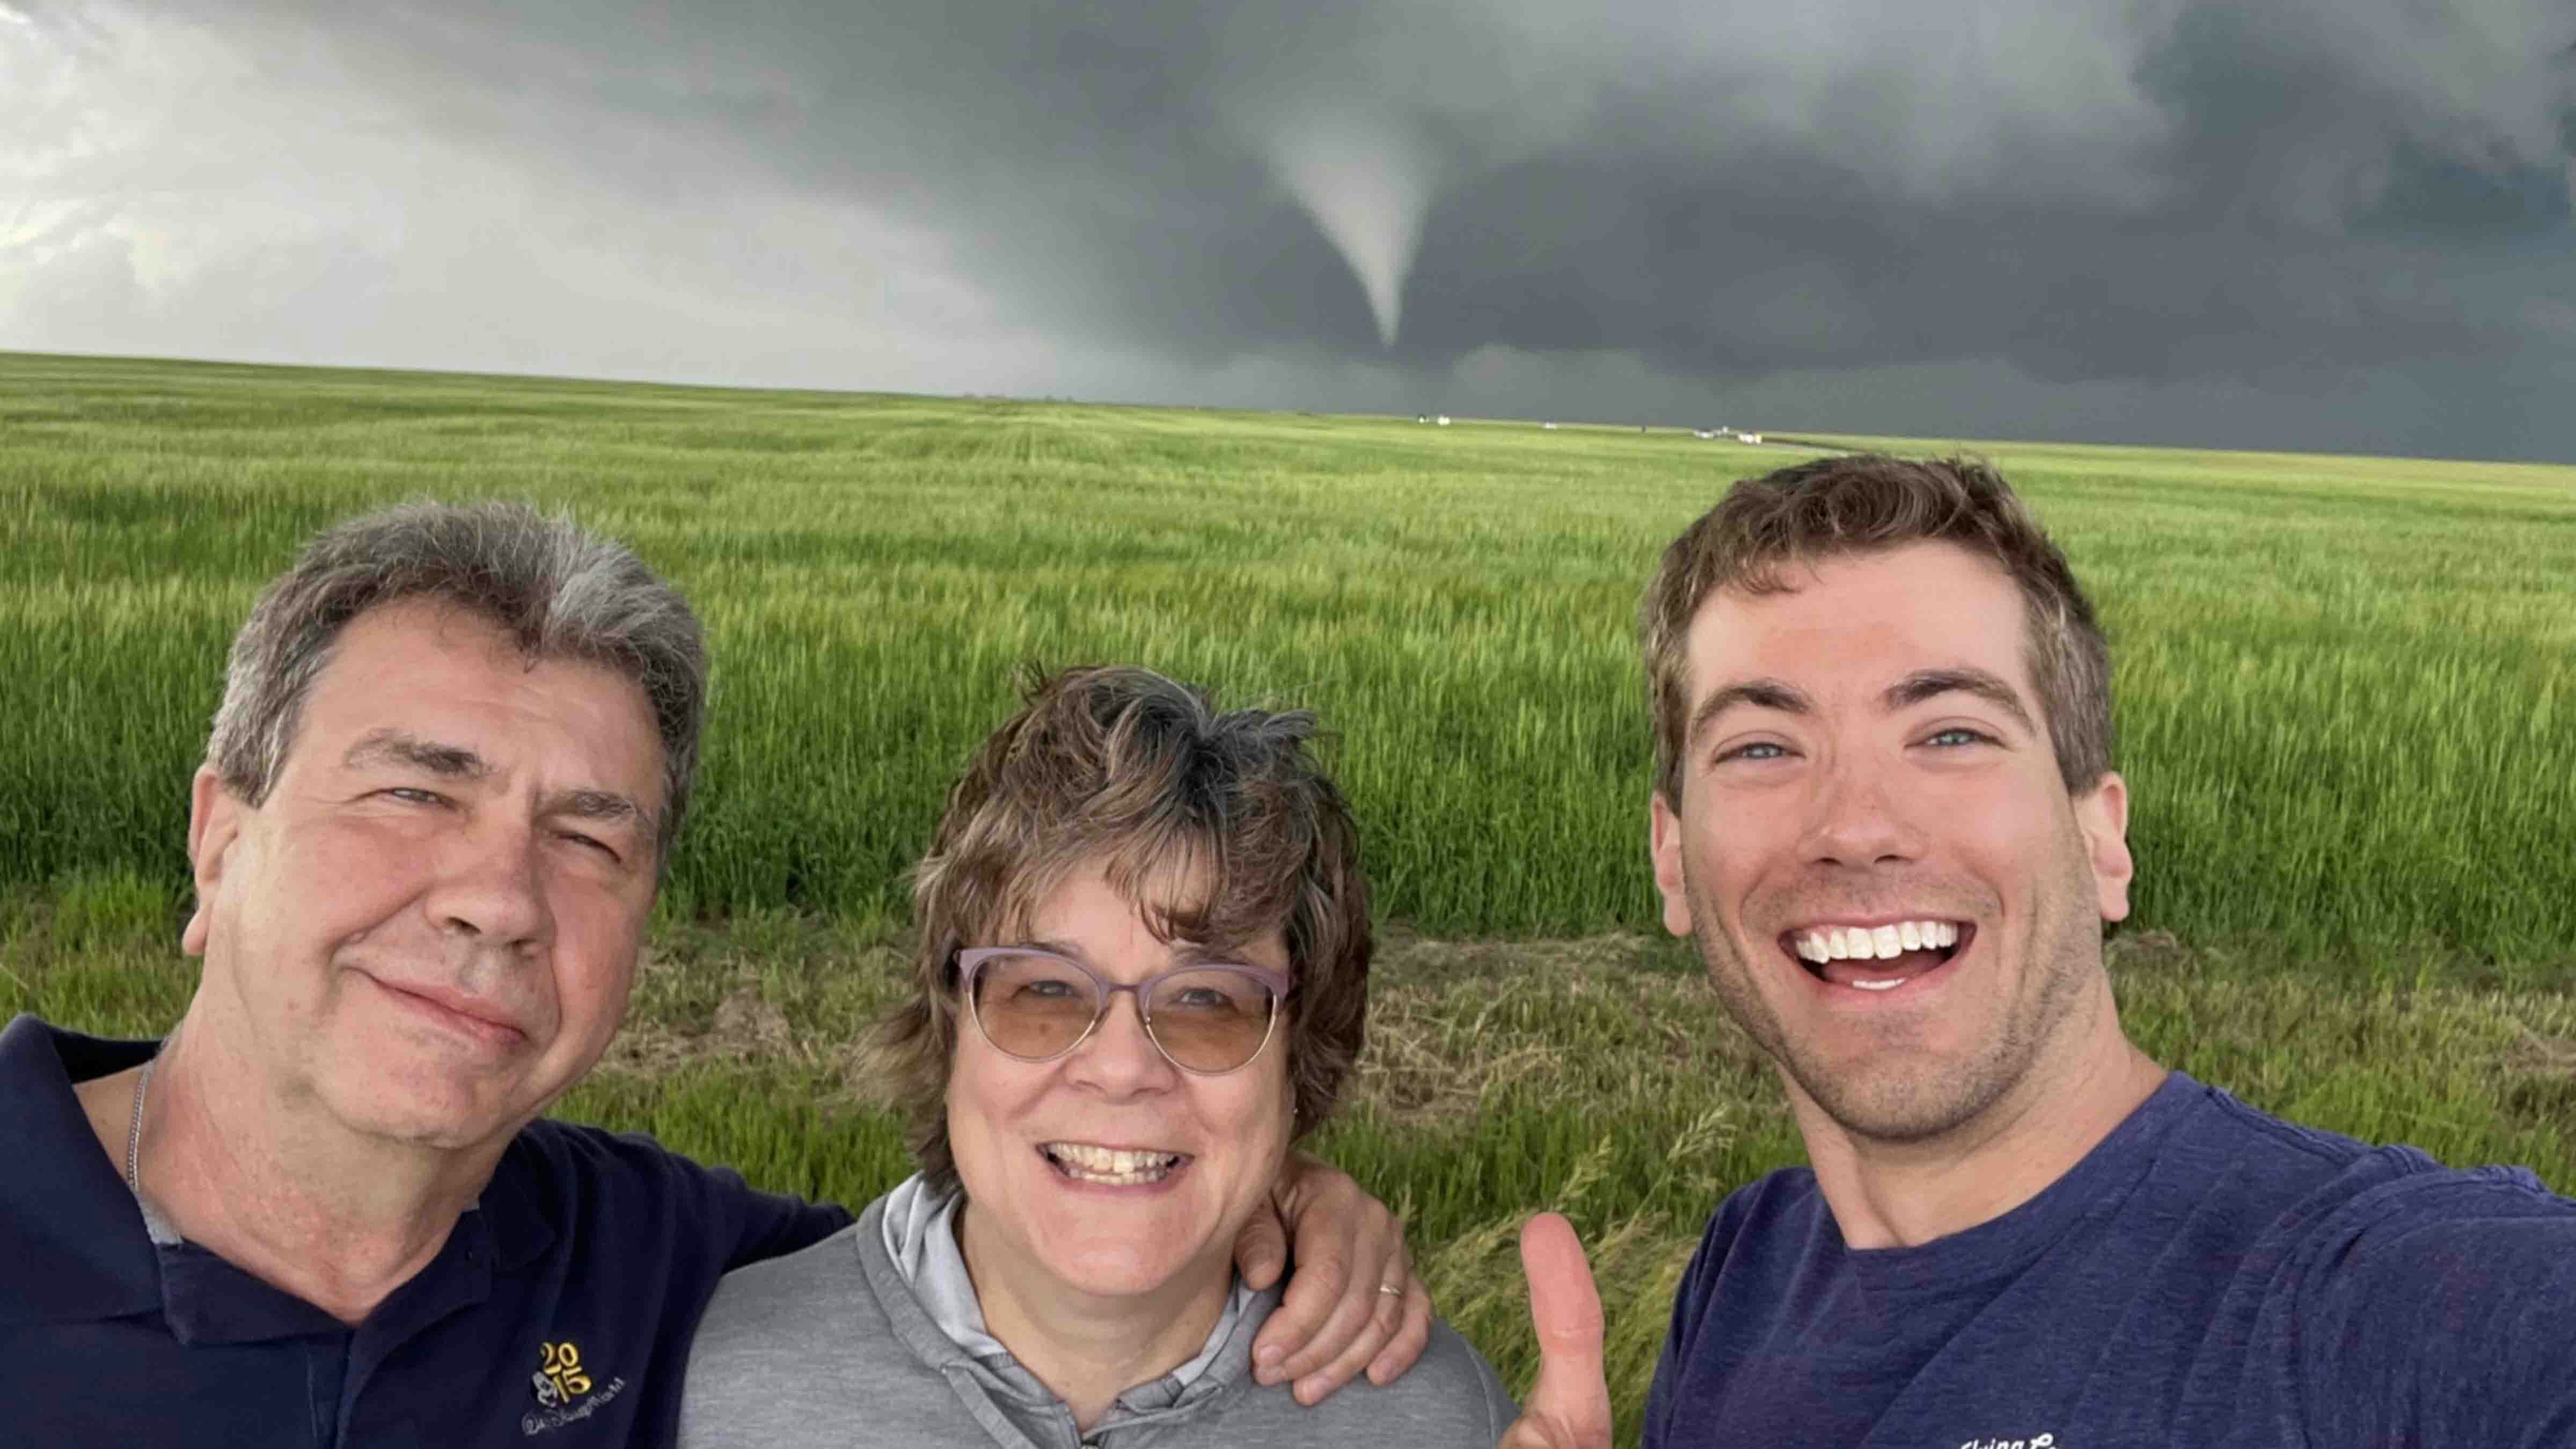 Photo of meteorologist Michael Charnik and family, via Twitter